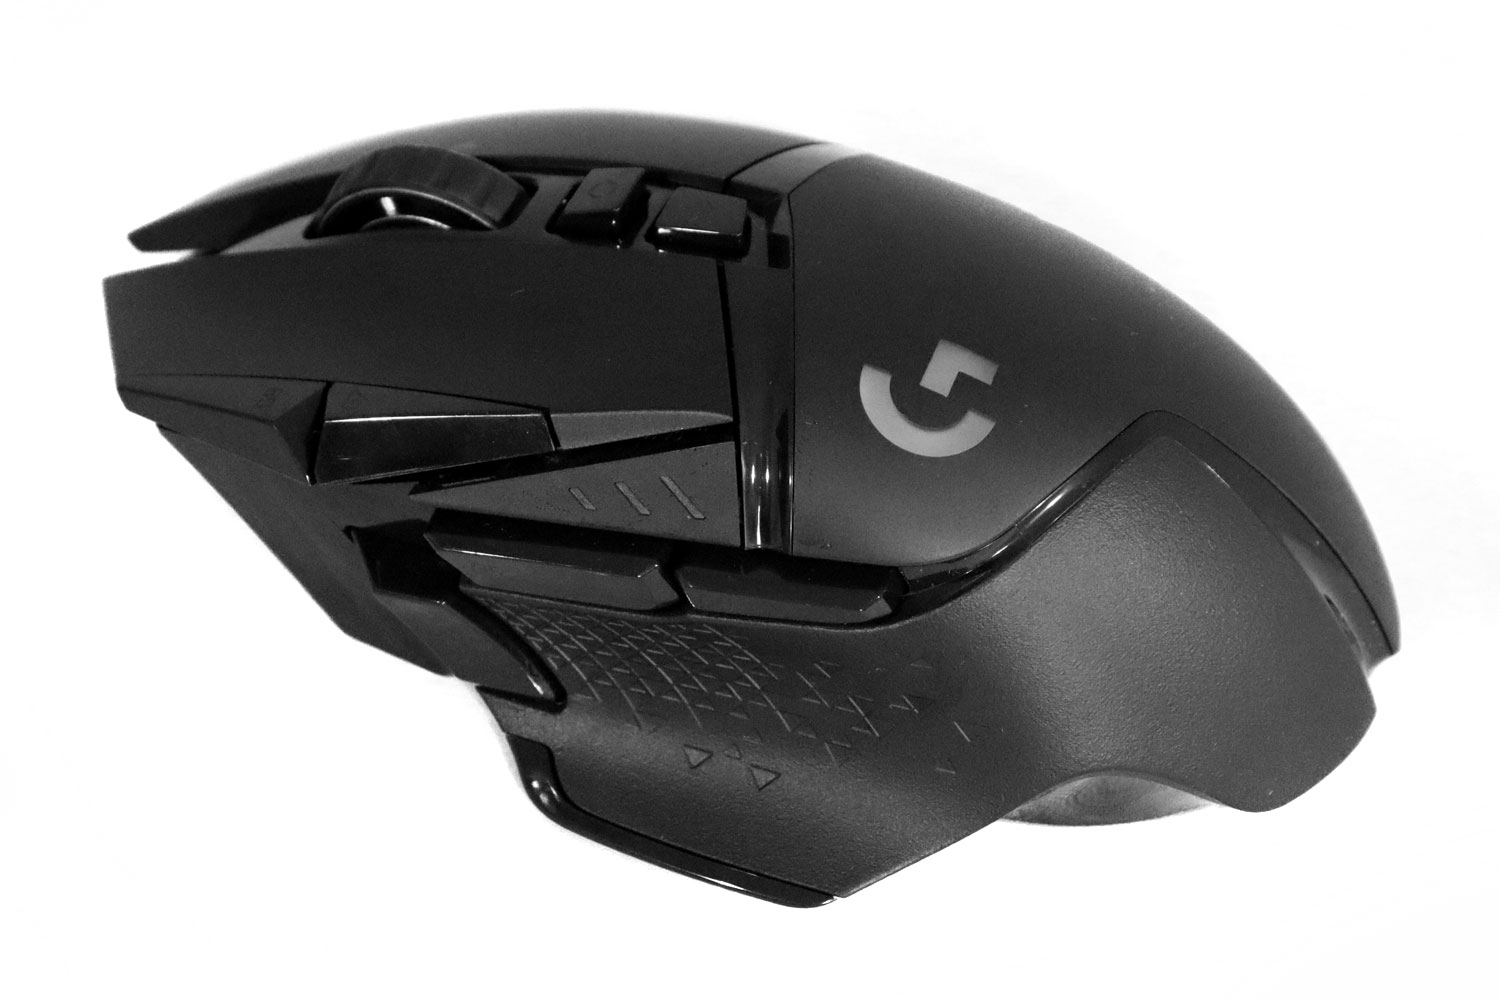 Logitech G502 Lightspeed Mouse Review: Who Needs Wires? | Digital 